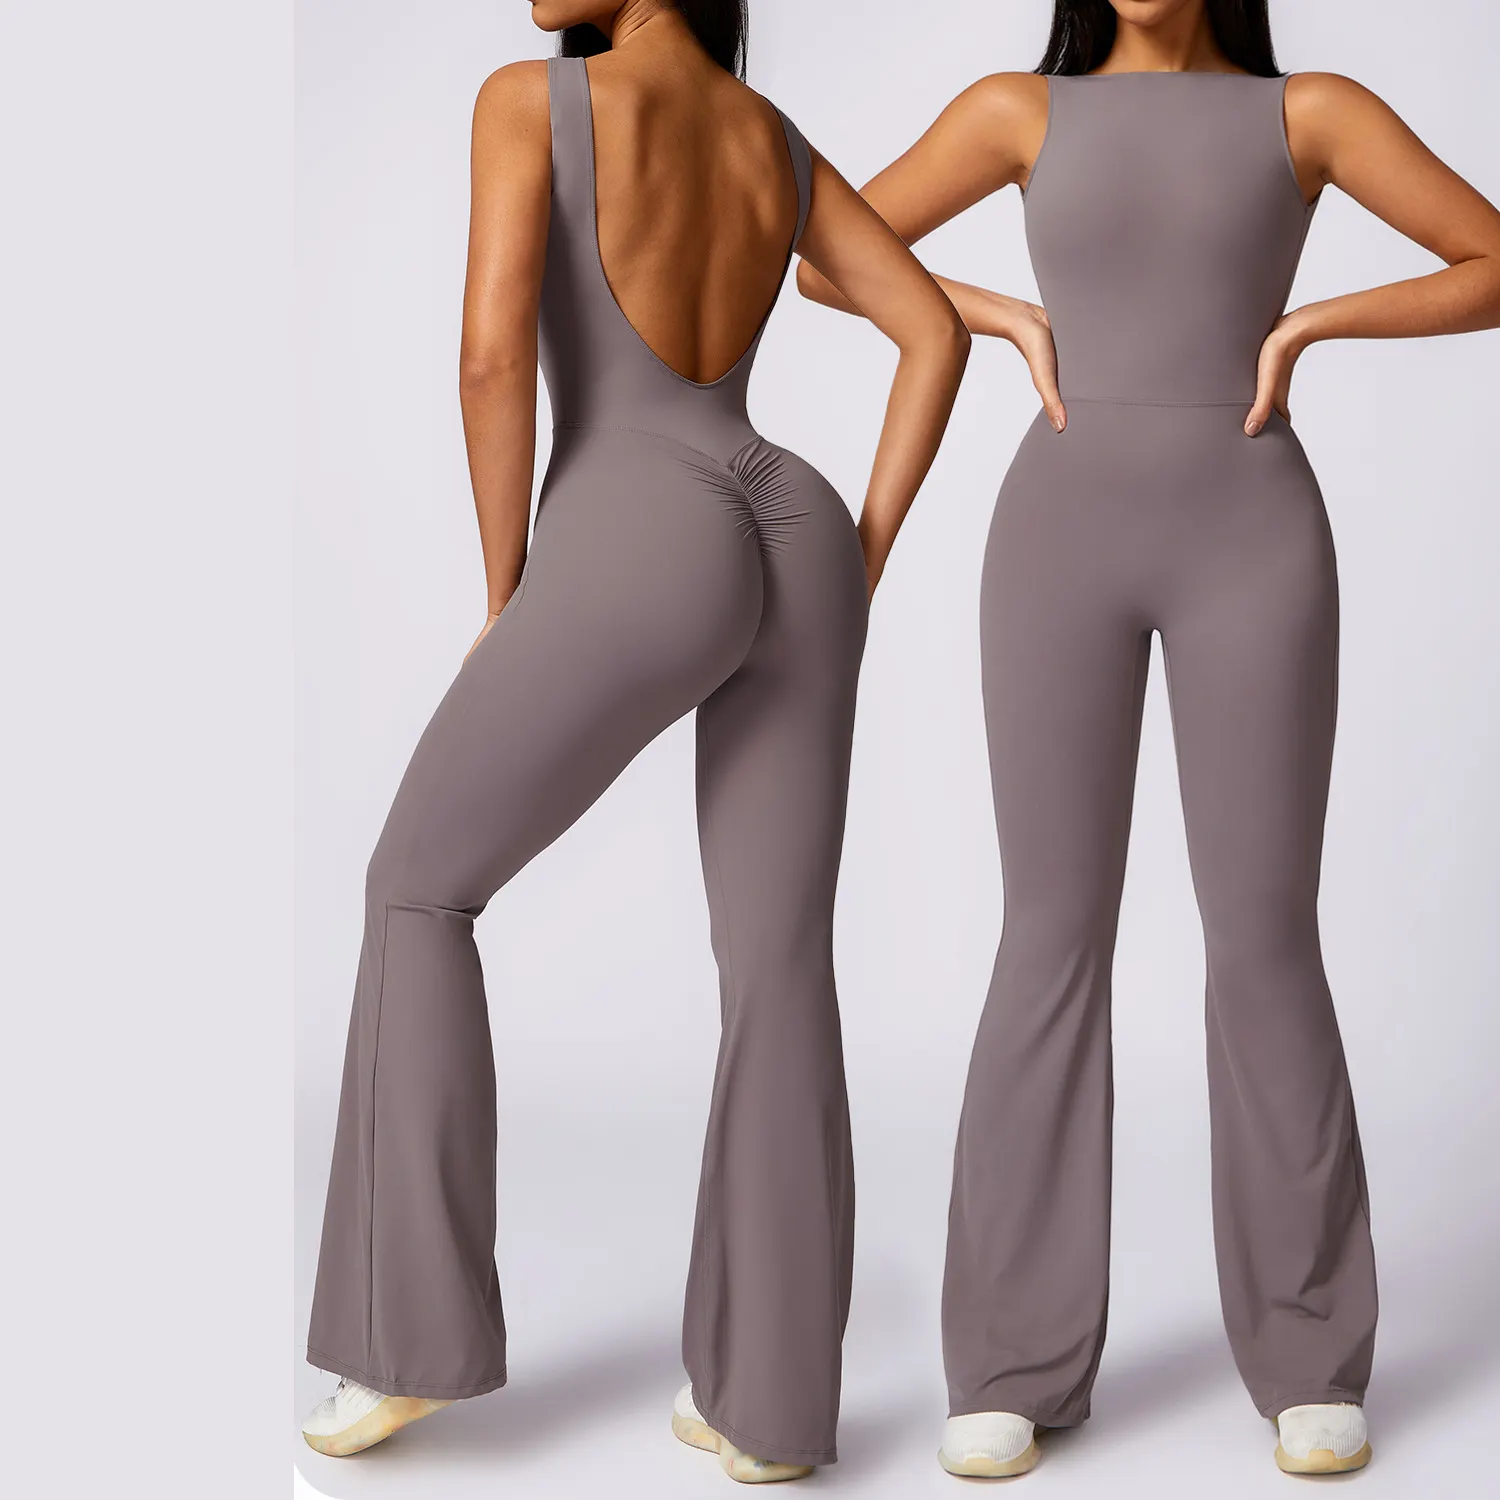 Women New High Quality Long Length Hollow Back Soft Quick Dry Scrunch Back Yoga Jumpsuit